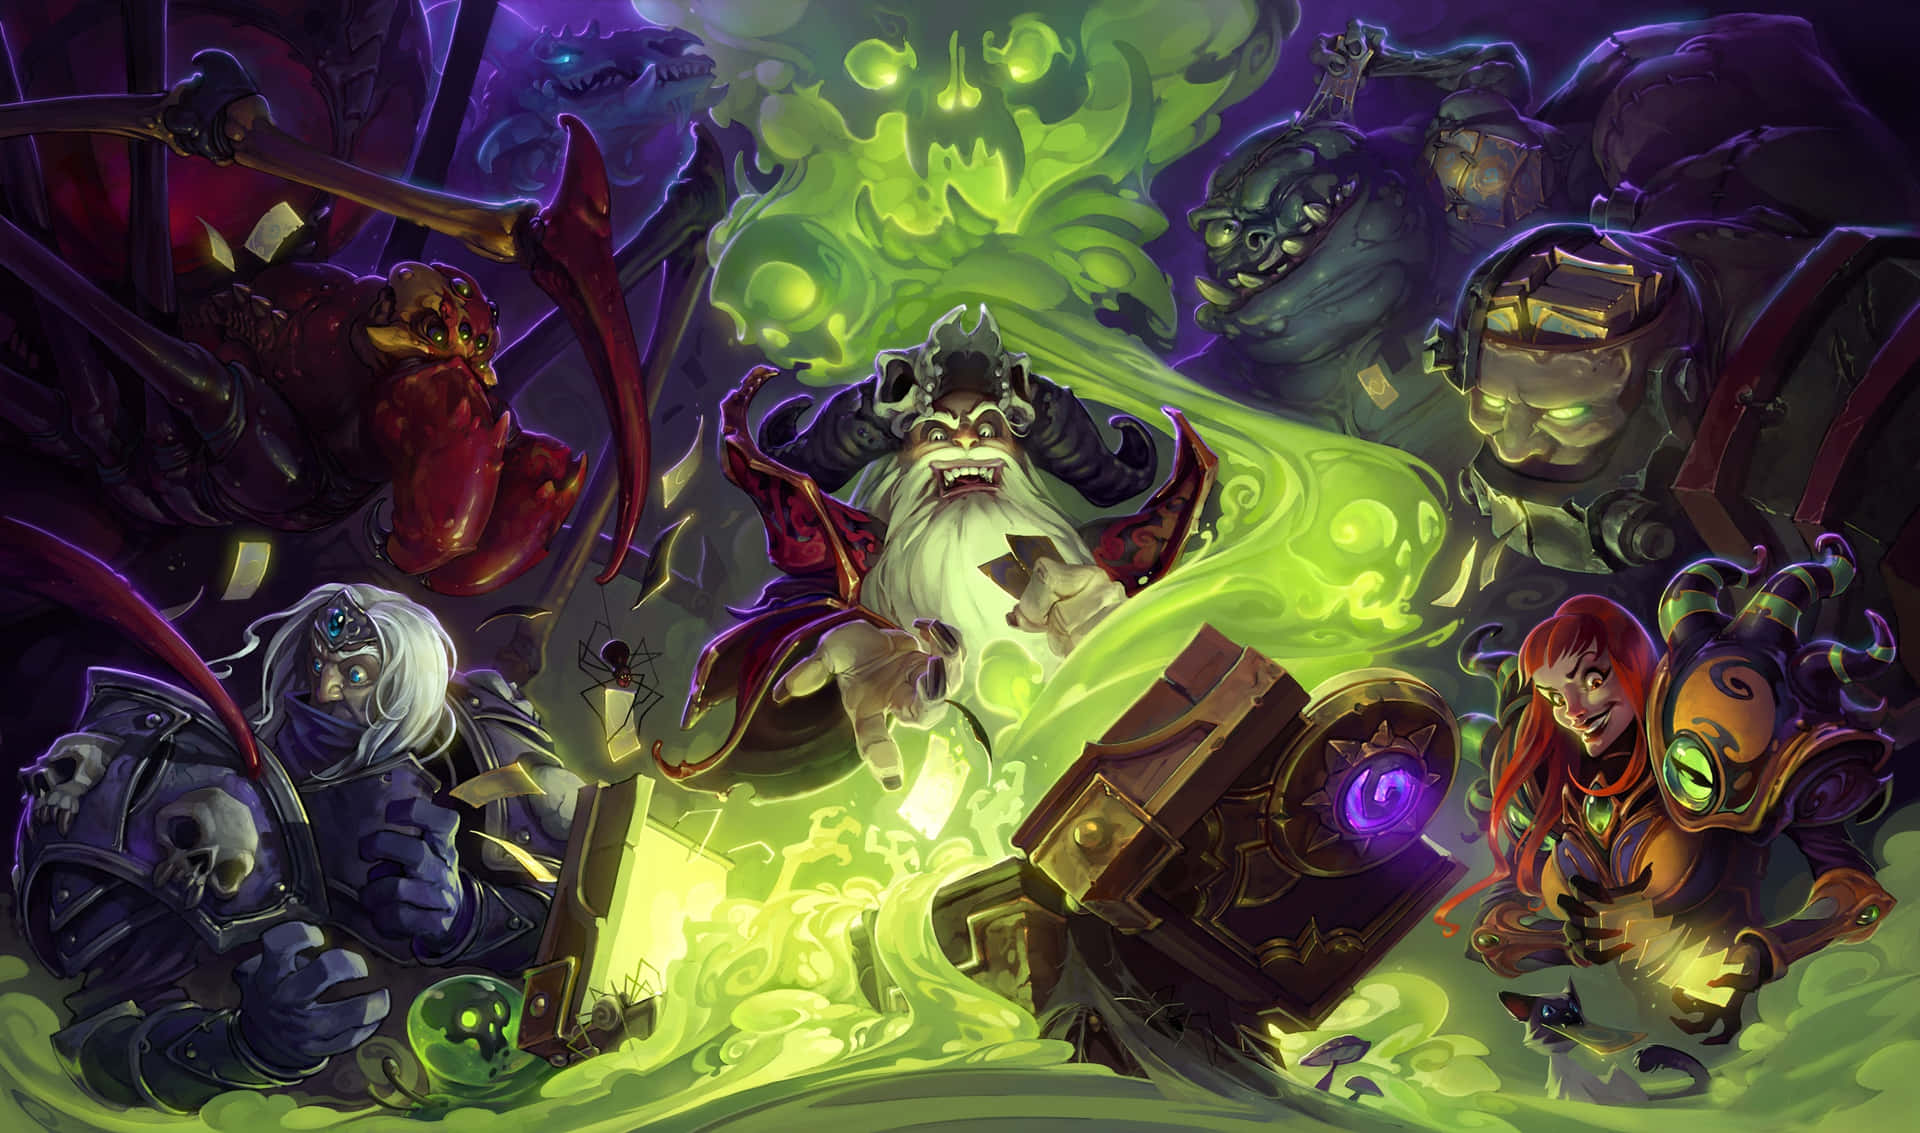 "Immerse yourself in the world of Hearthstone with this vibrant background."